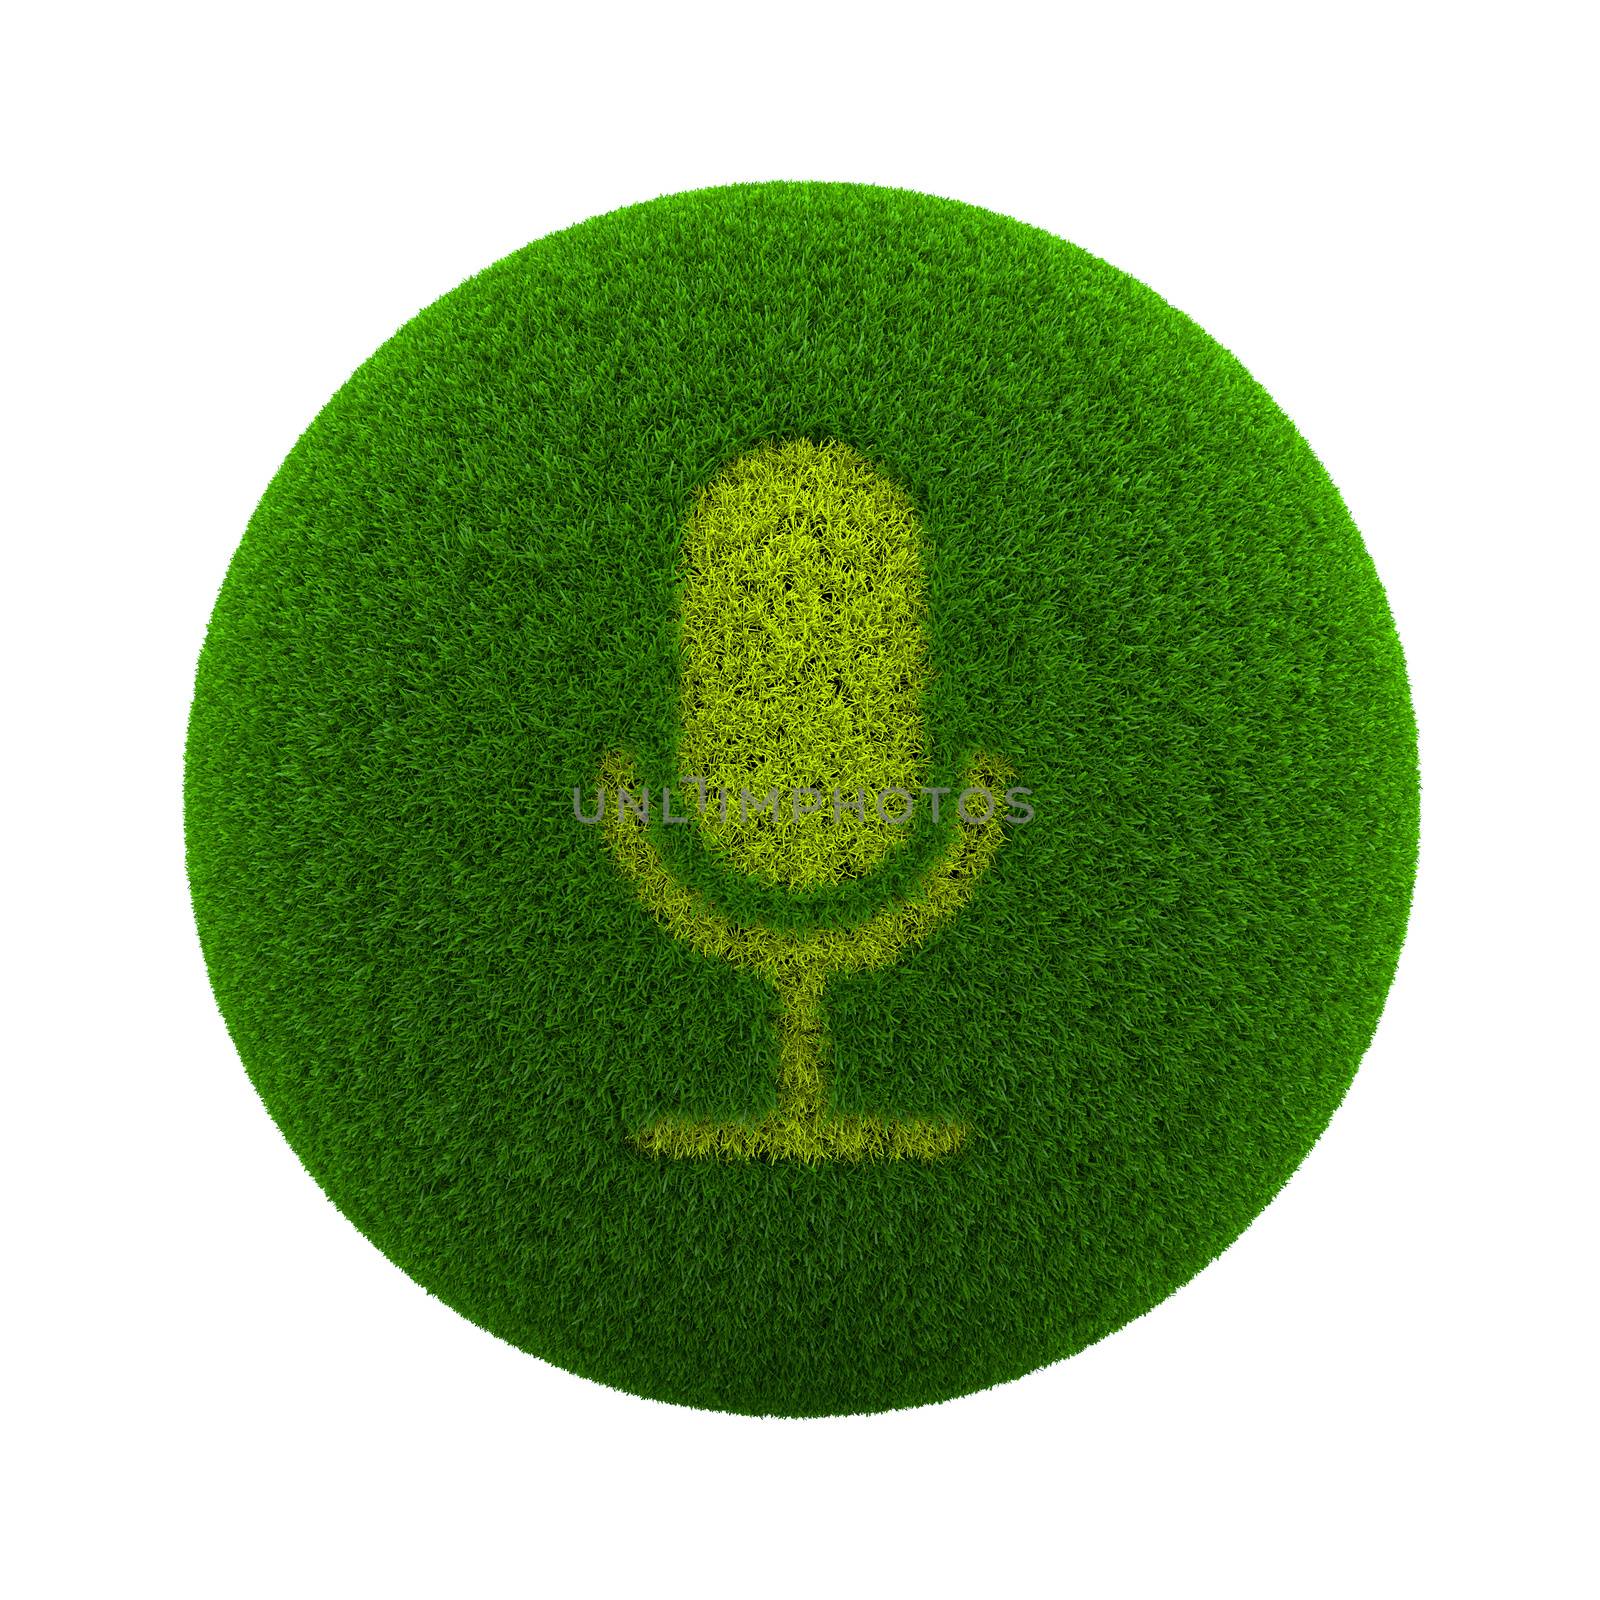 Grass Sphere Mic Icon by make